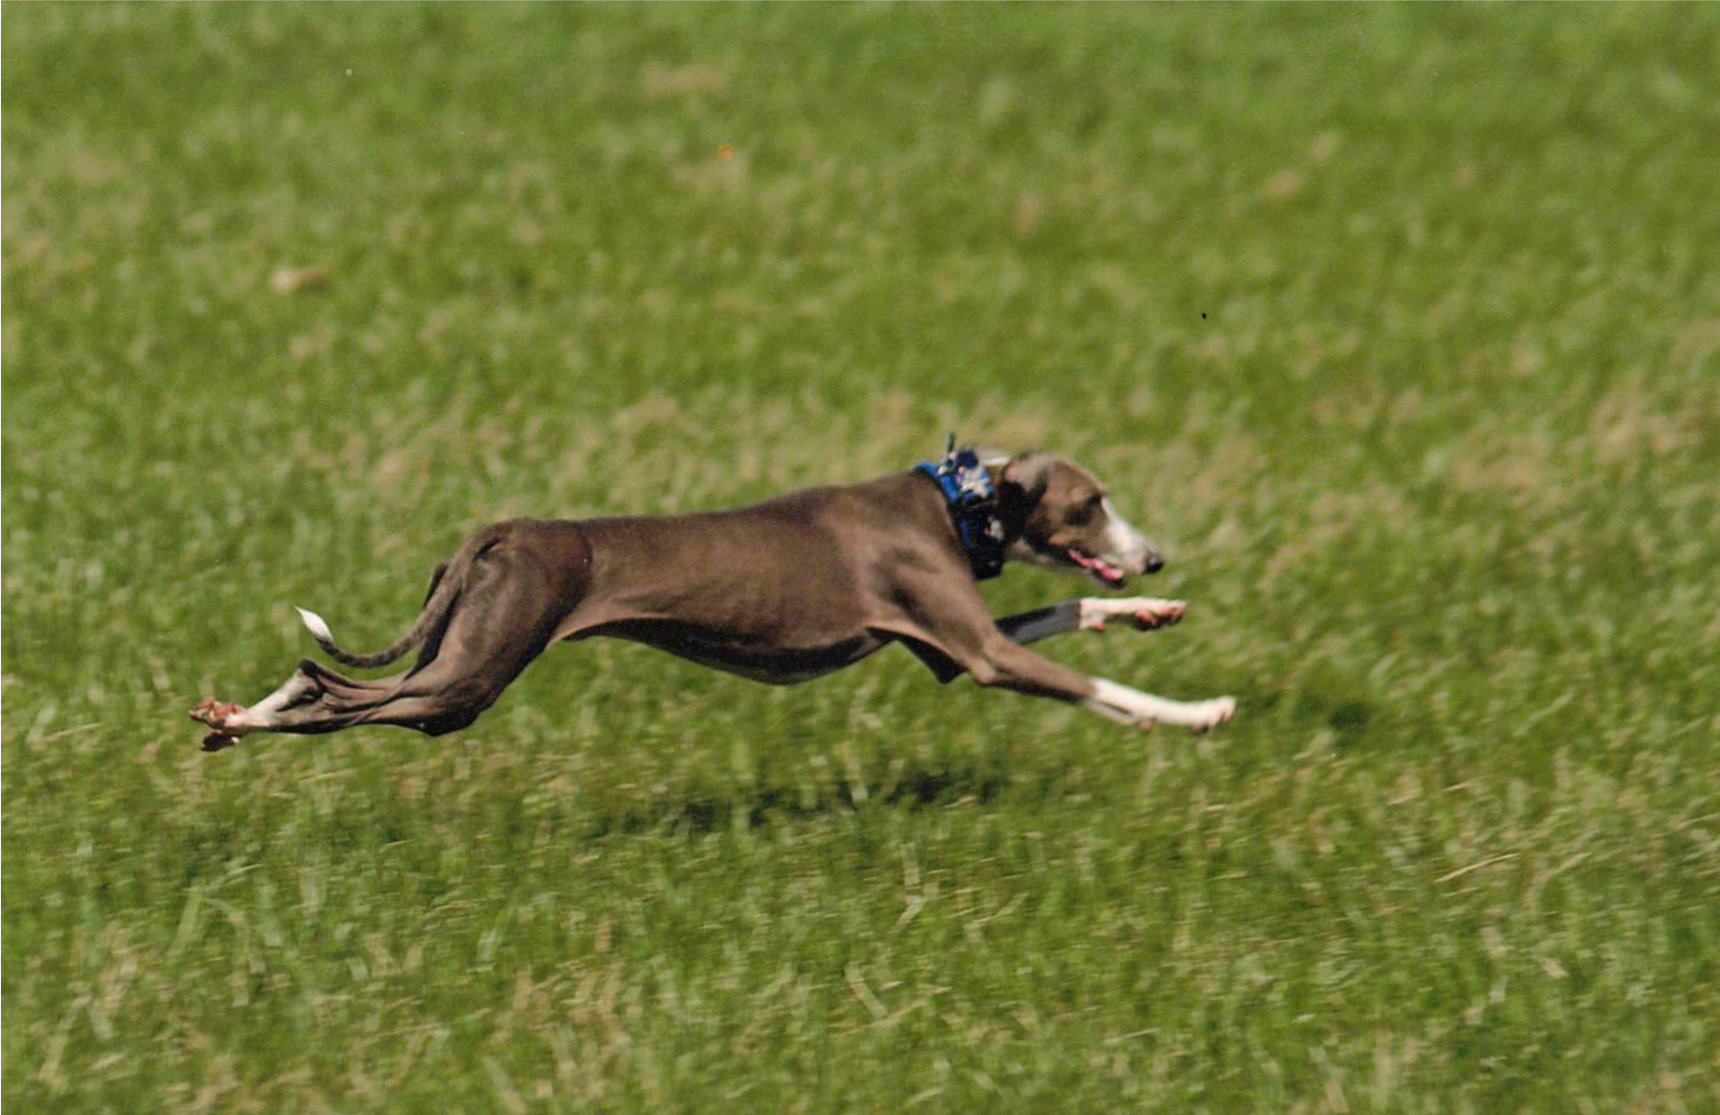 Italian Greyhounds and Electric fences